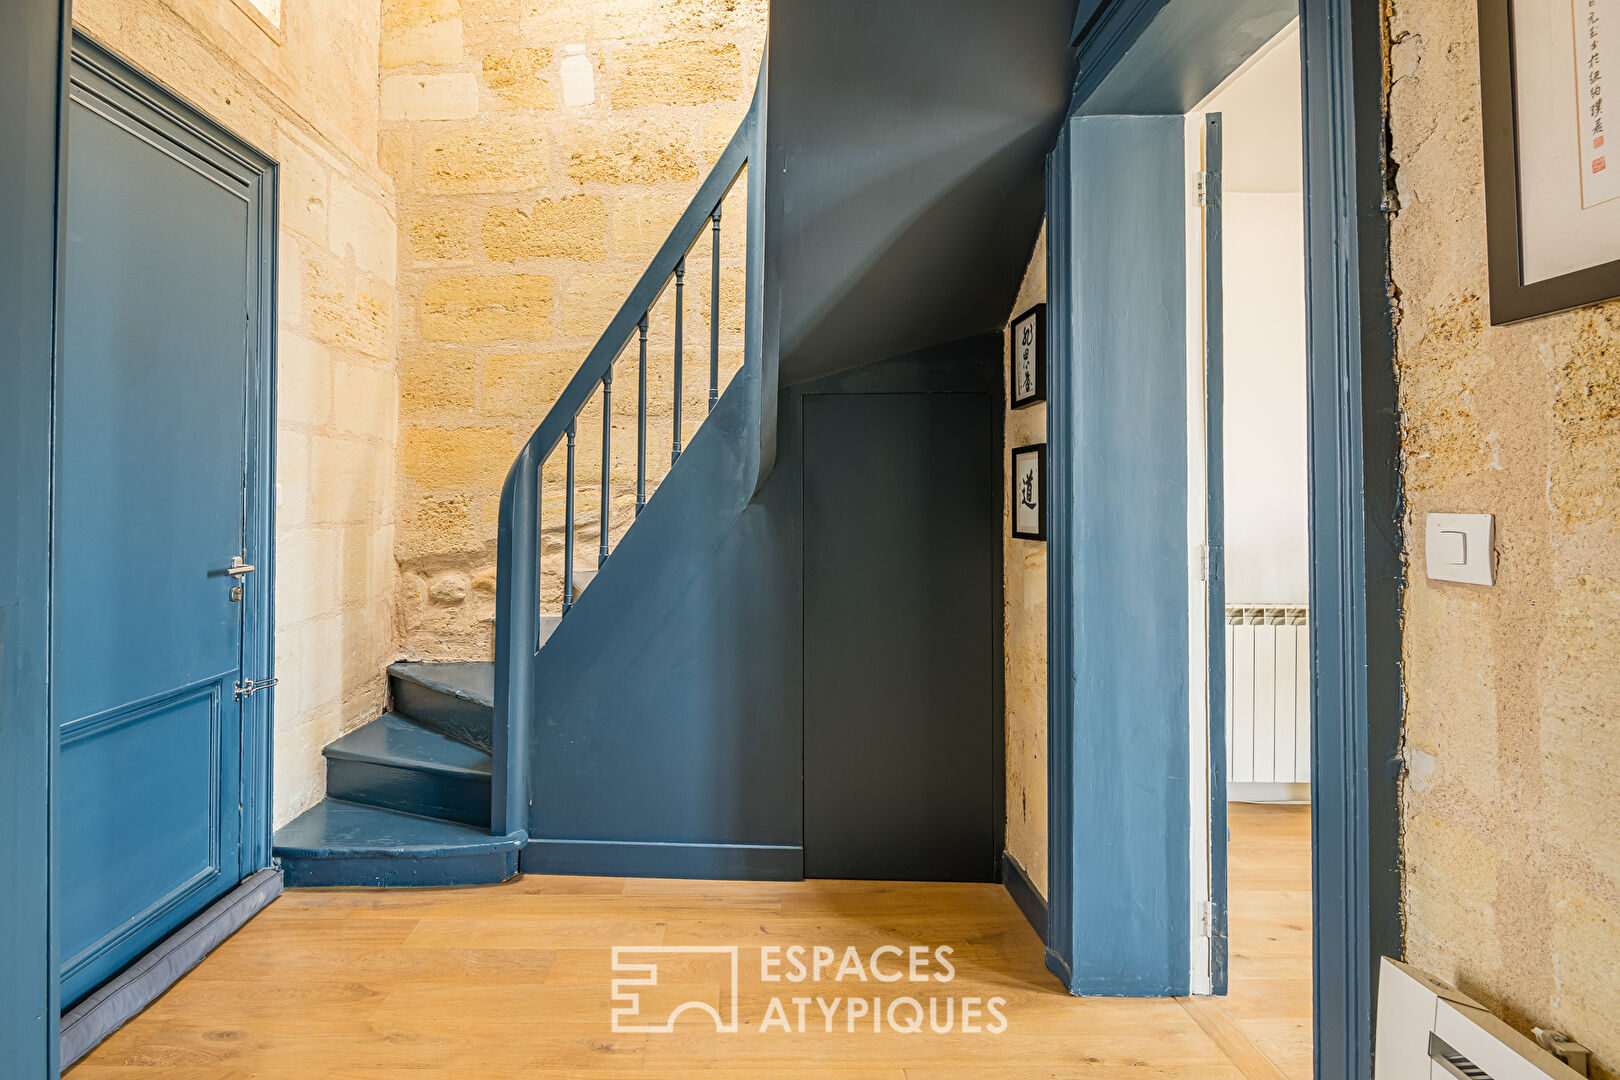 Renovated bourgeois apartment in the heart of Chartrons